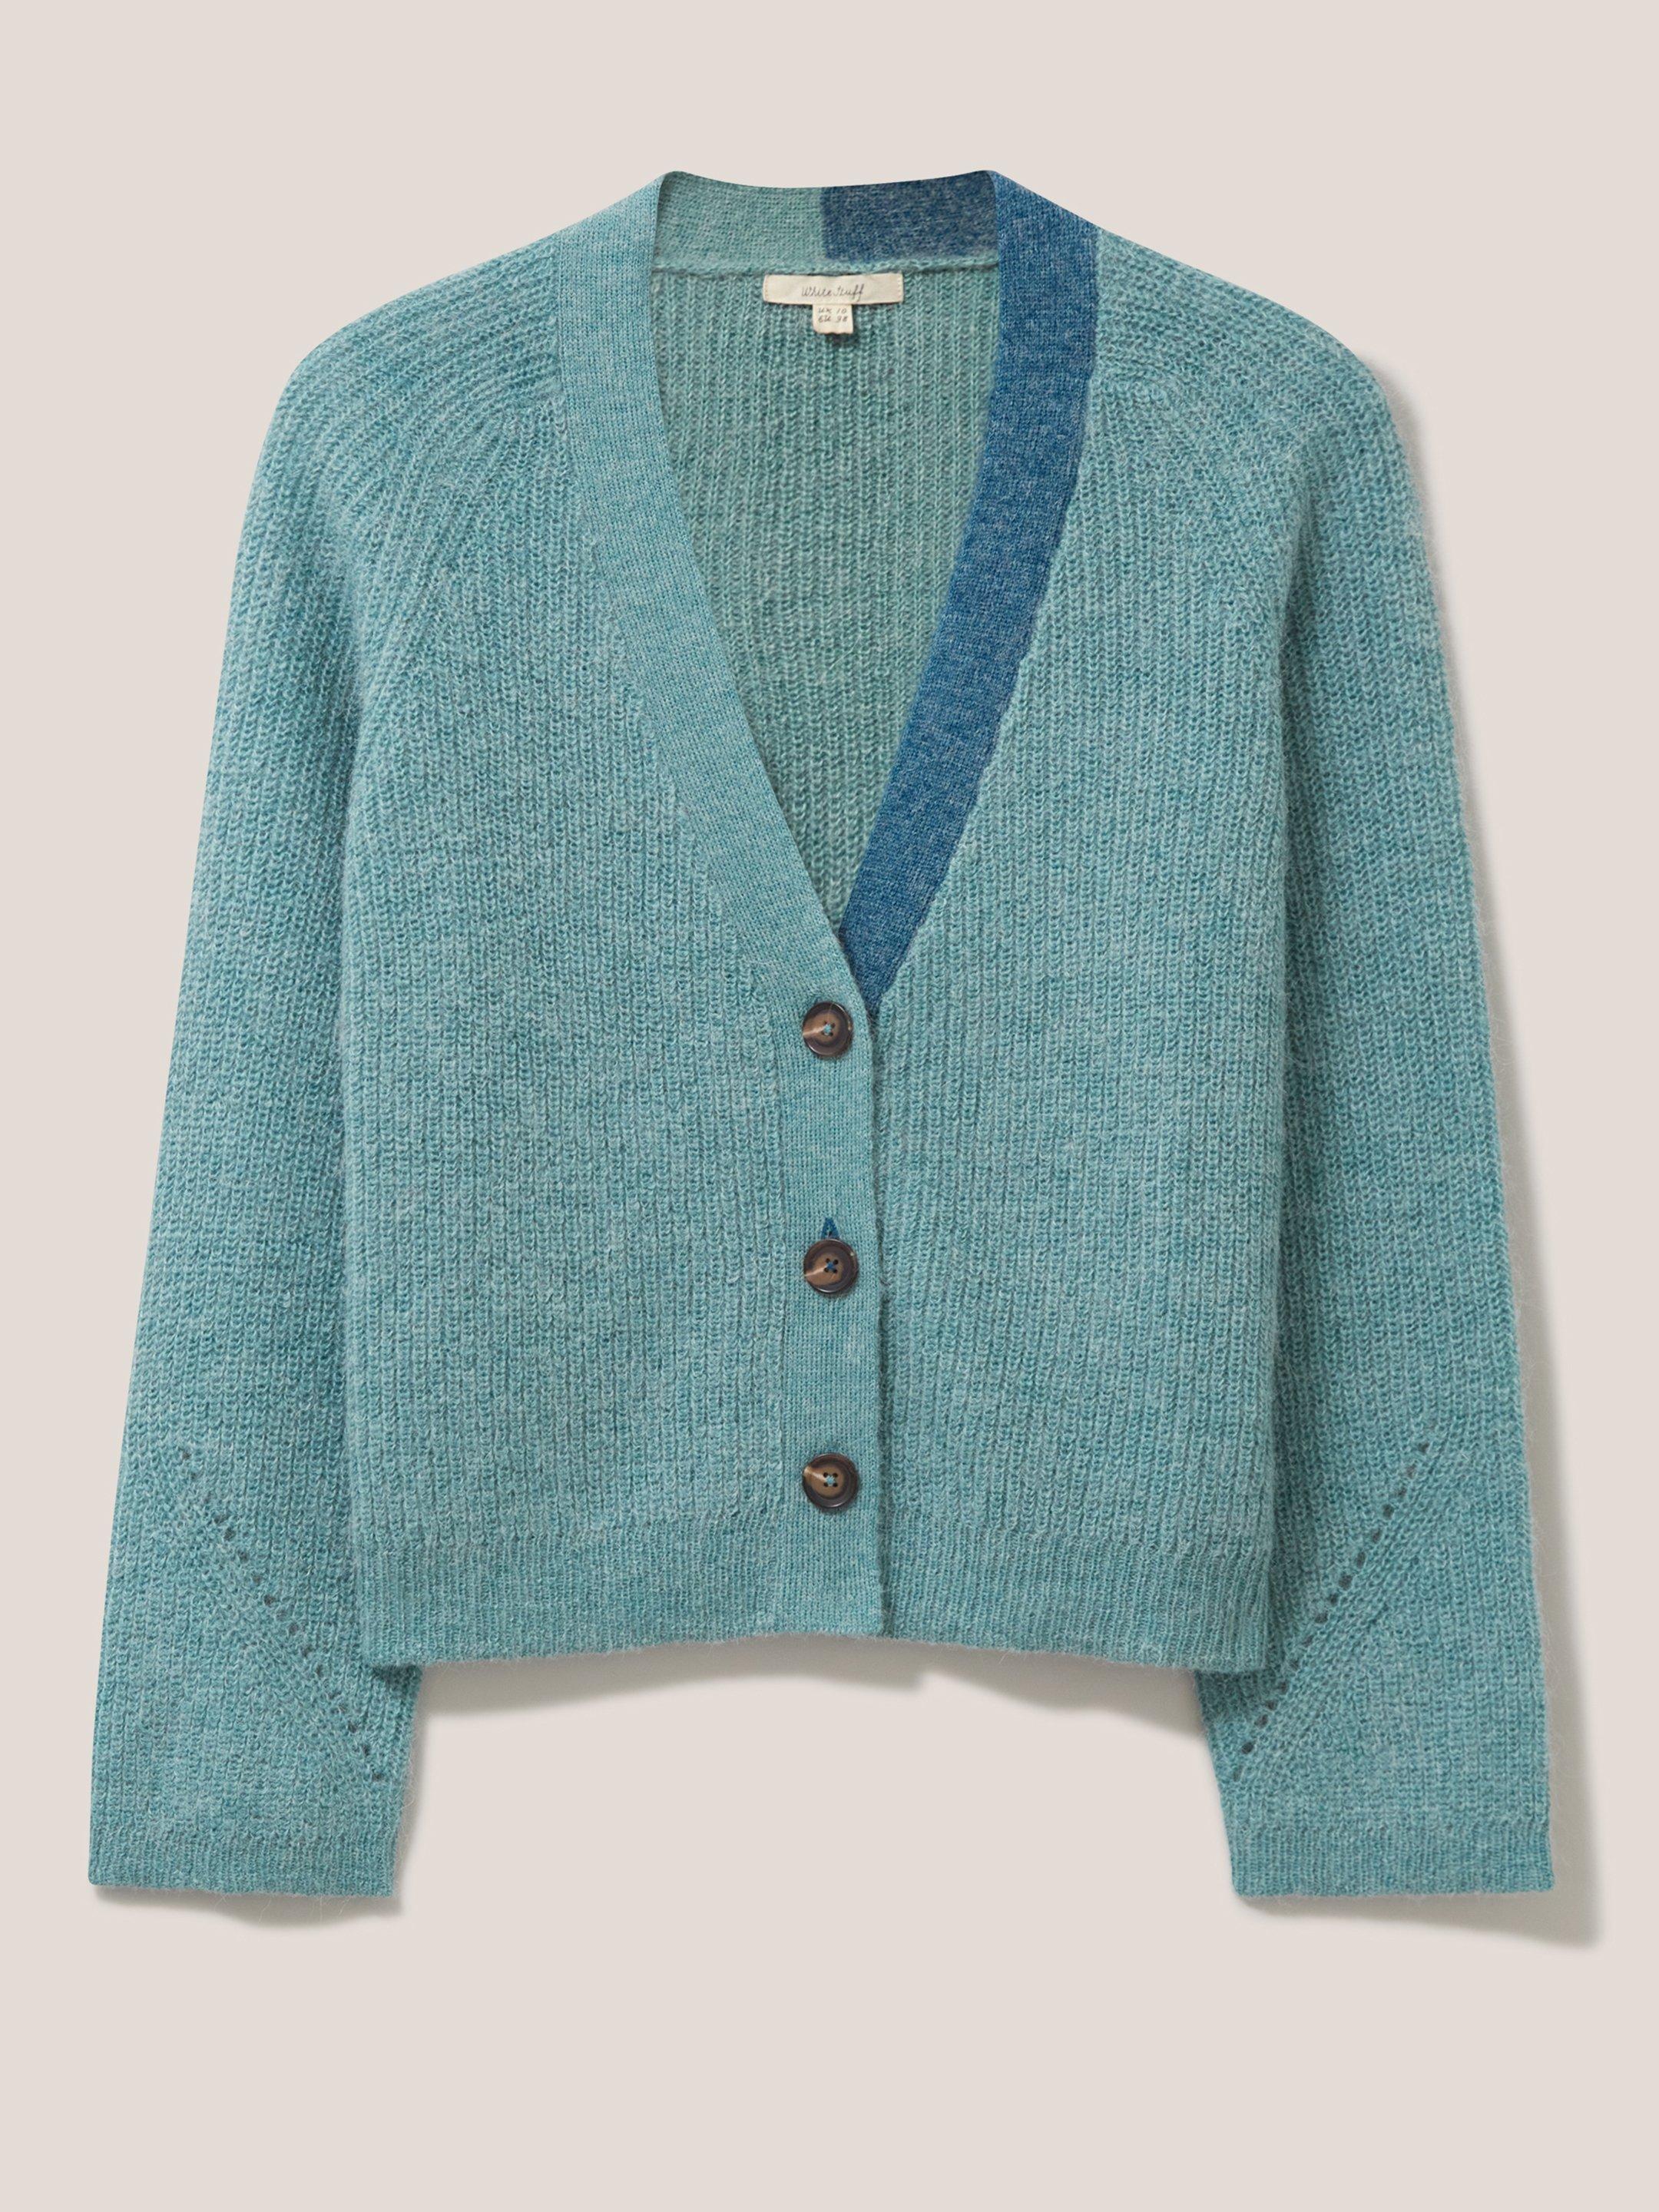 Dehlia Knitted Cardi in MID TEAL - FLAT FRONT